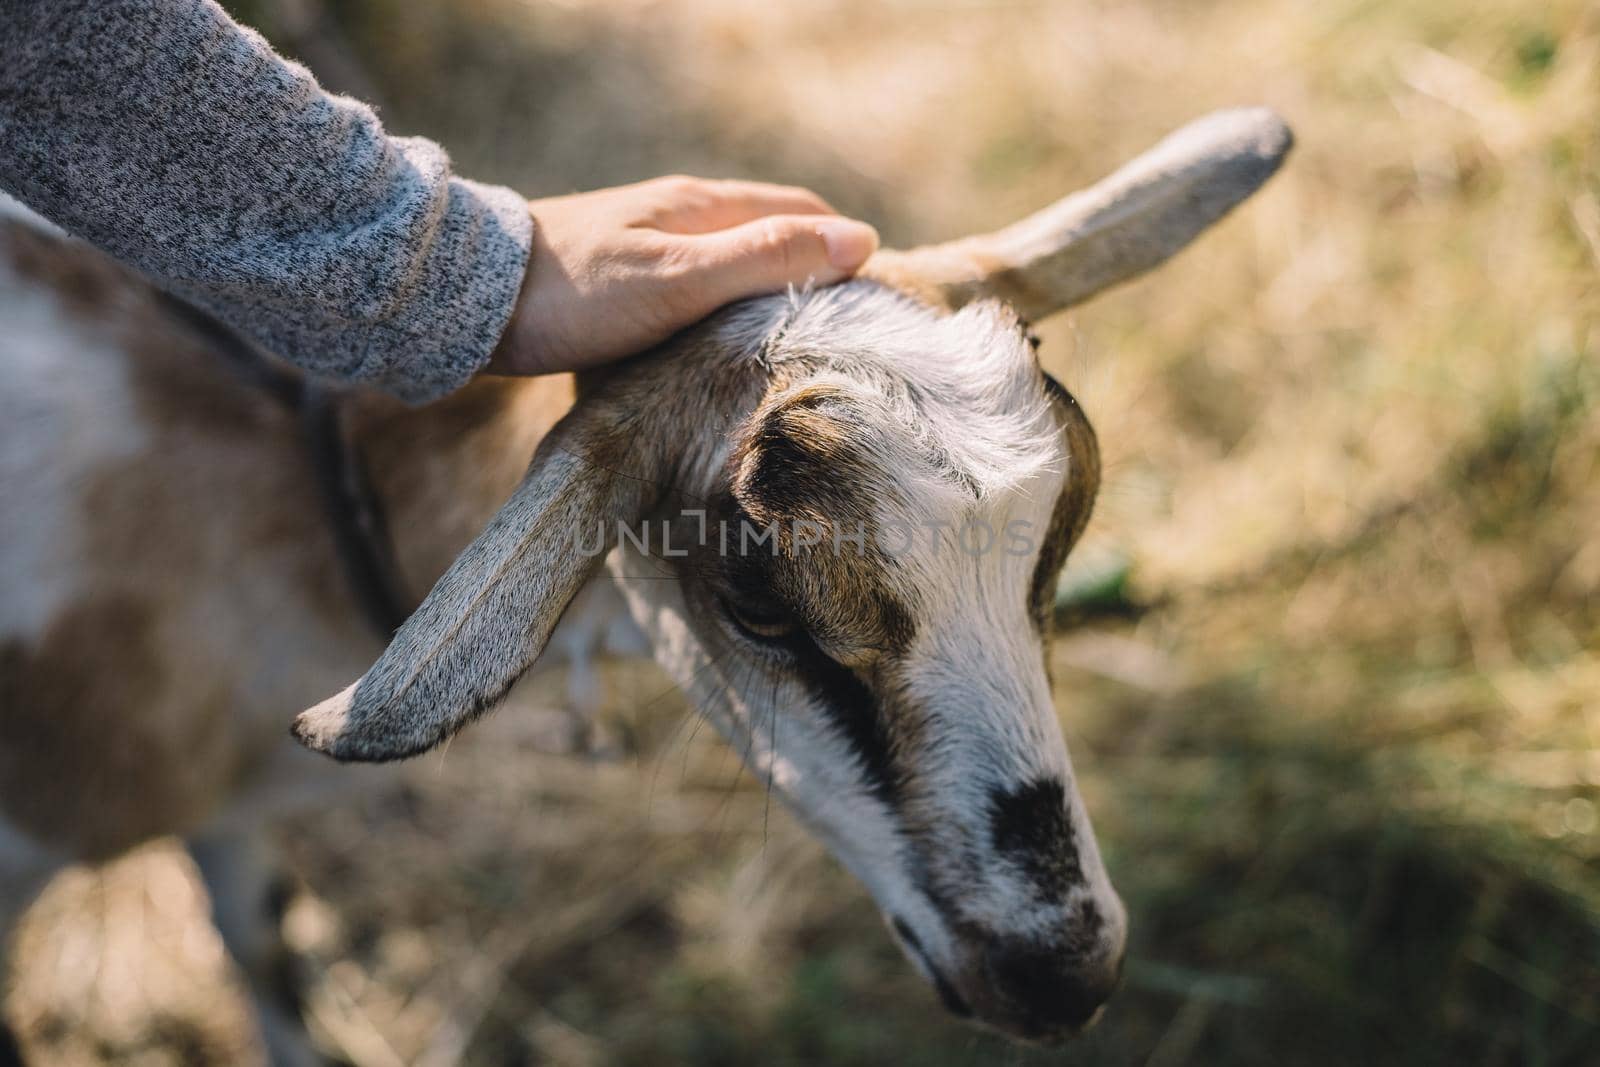 A woman strokes the goat's fur in nature close up hands